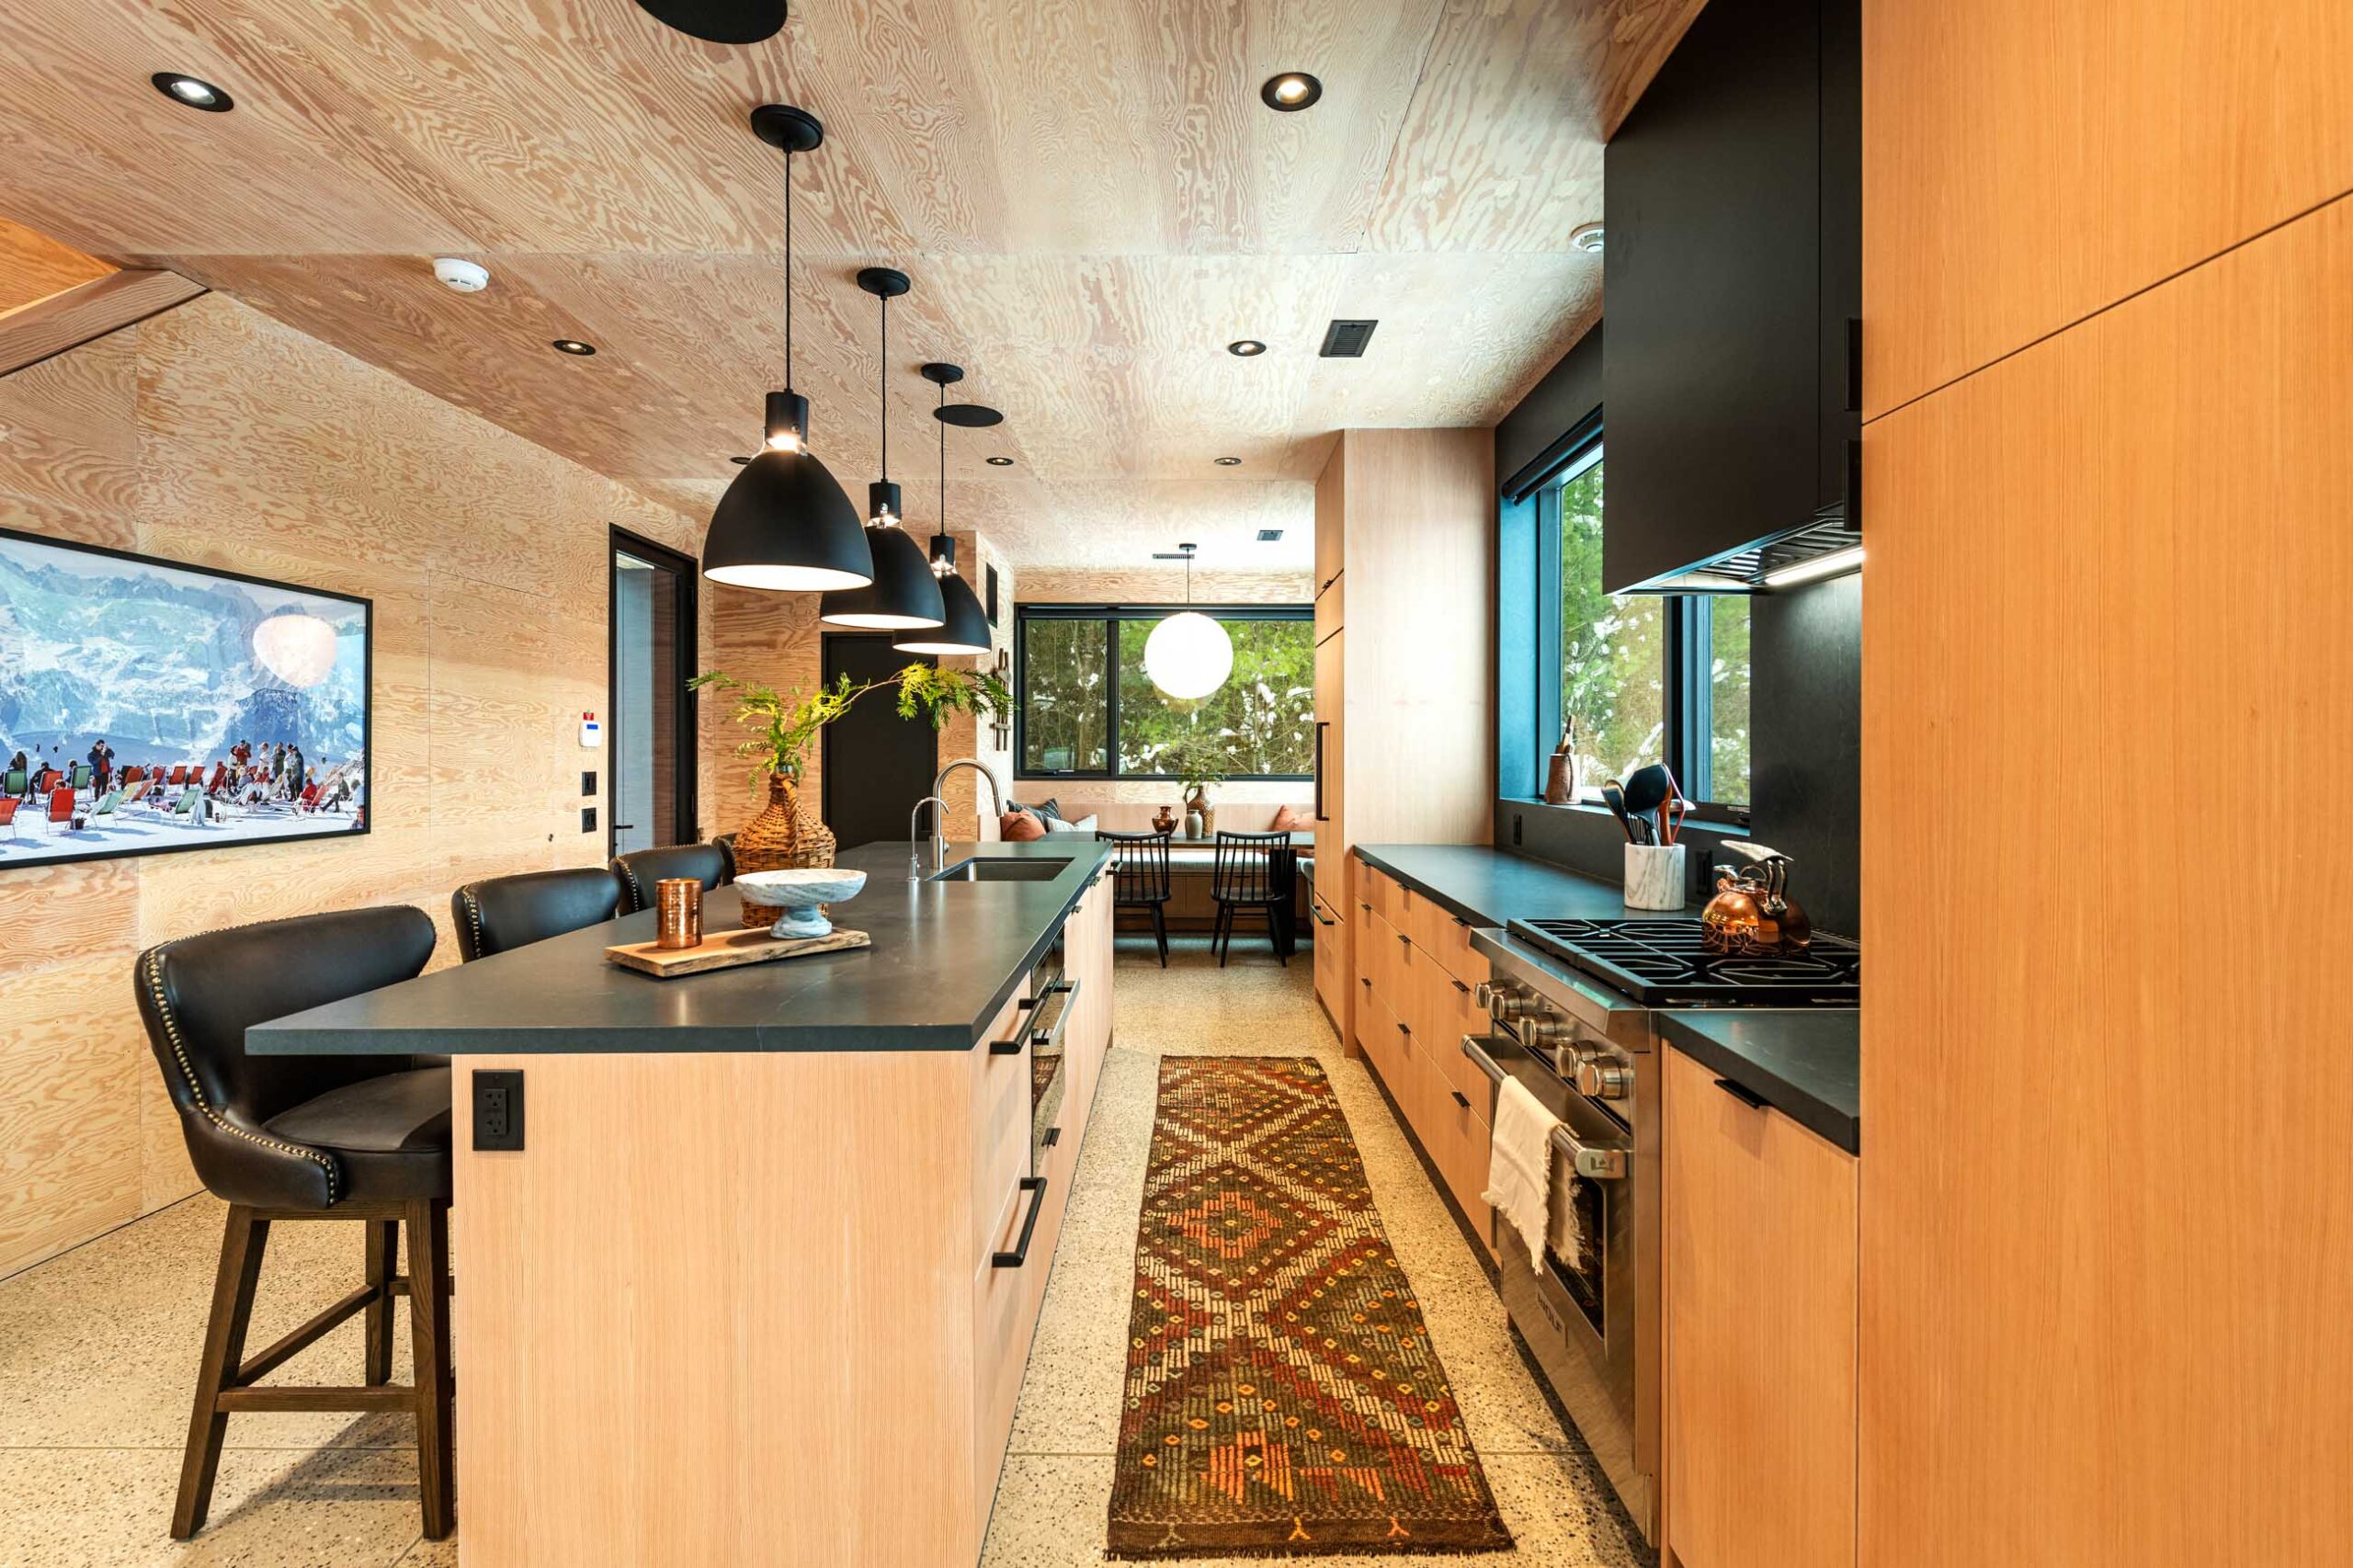 Custom Scandi-style Kitchen details of a Cabin built by Blake Farrow Project Management Inc.